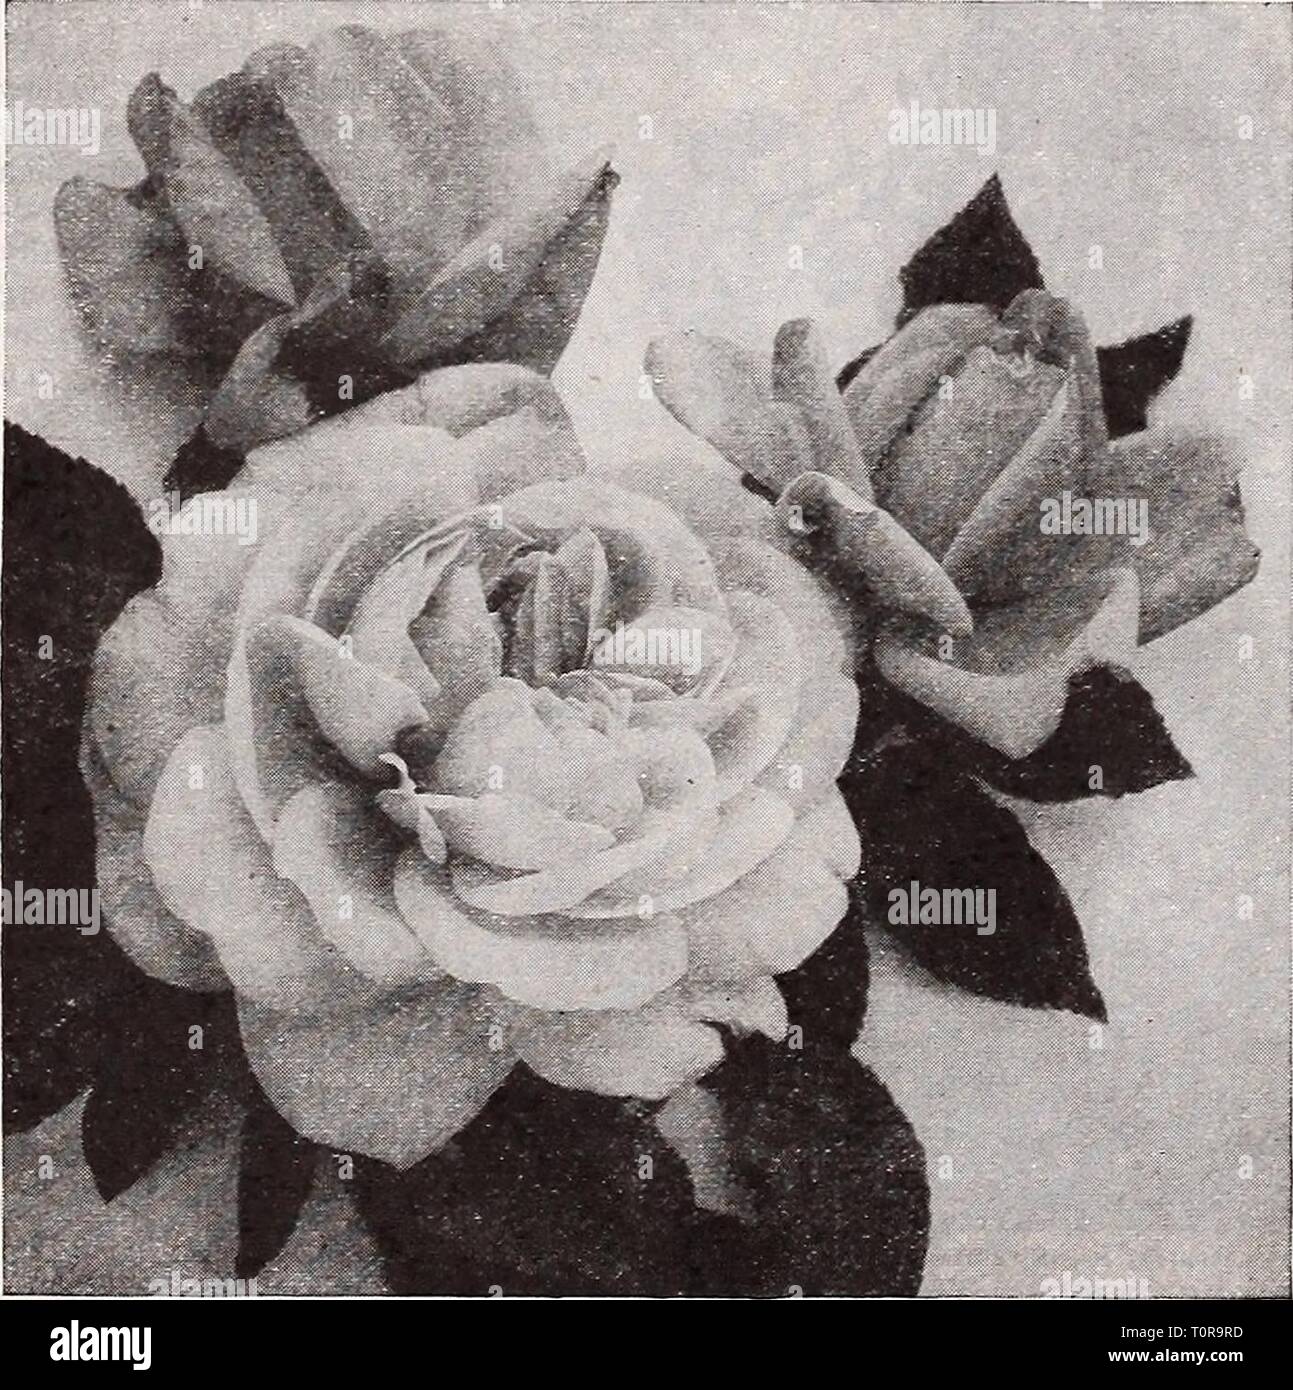 Dreer's autumn catalogue 1932 (1932) Dreer's autumn catalogue 1932  dreersautumncata1932henr Year: 1932  i SELECT-GROSES i /MIMEIPMR POLYANTHA OR BABY ROSES A type of Roses which is very popular for bedding purposes. They form shape- ly, compact bushy specimens about 18 inches high, producing in great profusion from early in the season until severe frost immense trusses of small flowers. Cecile Brunner (The Fairy, or Sweetheart Rose). A variety with dainty double little flowers of perfect form produced in many flowered graceful sprays; color a soft rosy-pink on a rich creamy-white ground. Geo Stock Photo